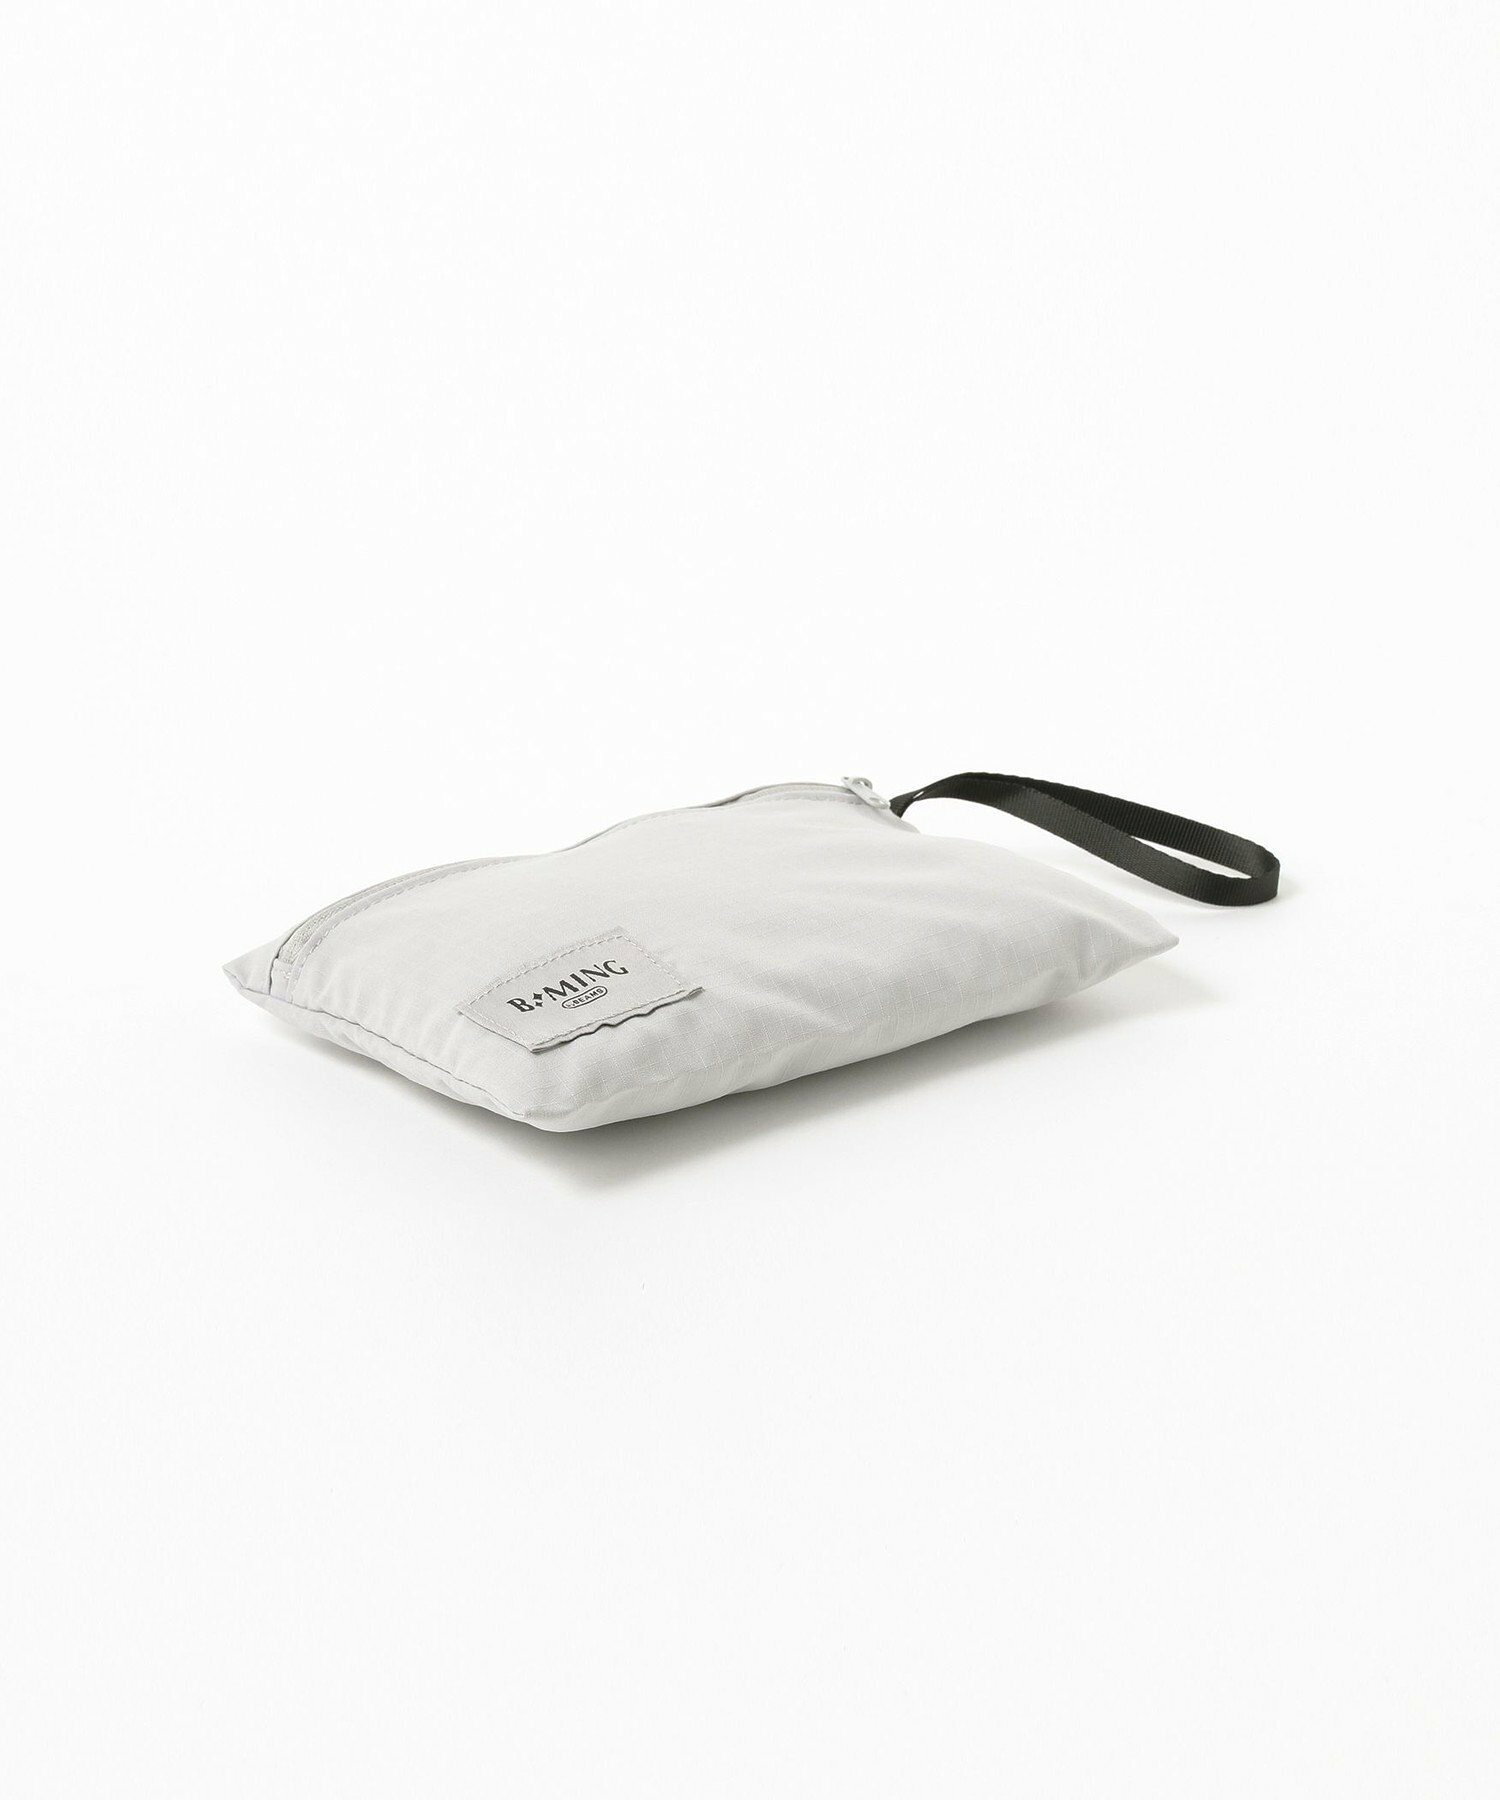 B:MING by BEAMS / RIPSTOP FLAT POUCH M